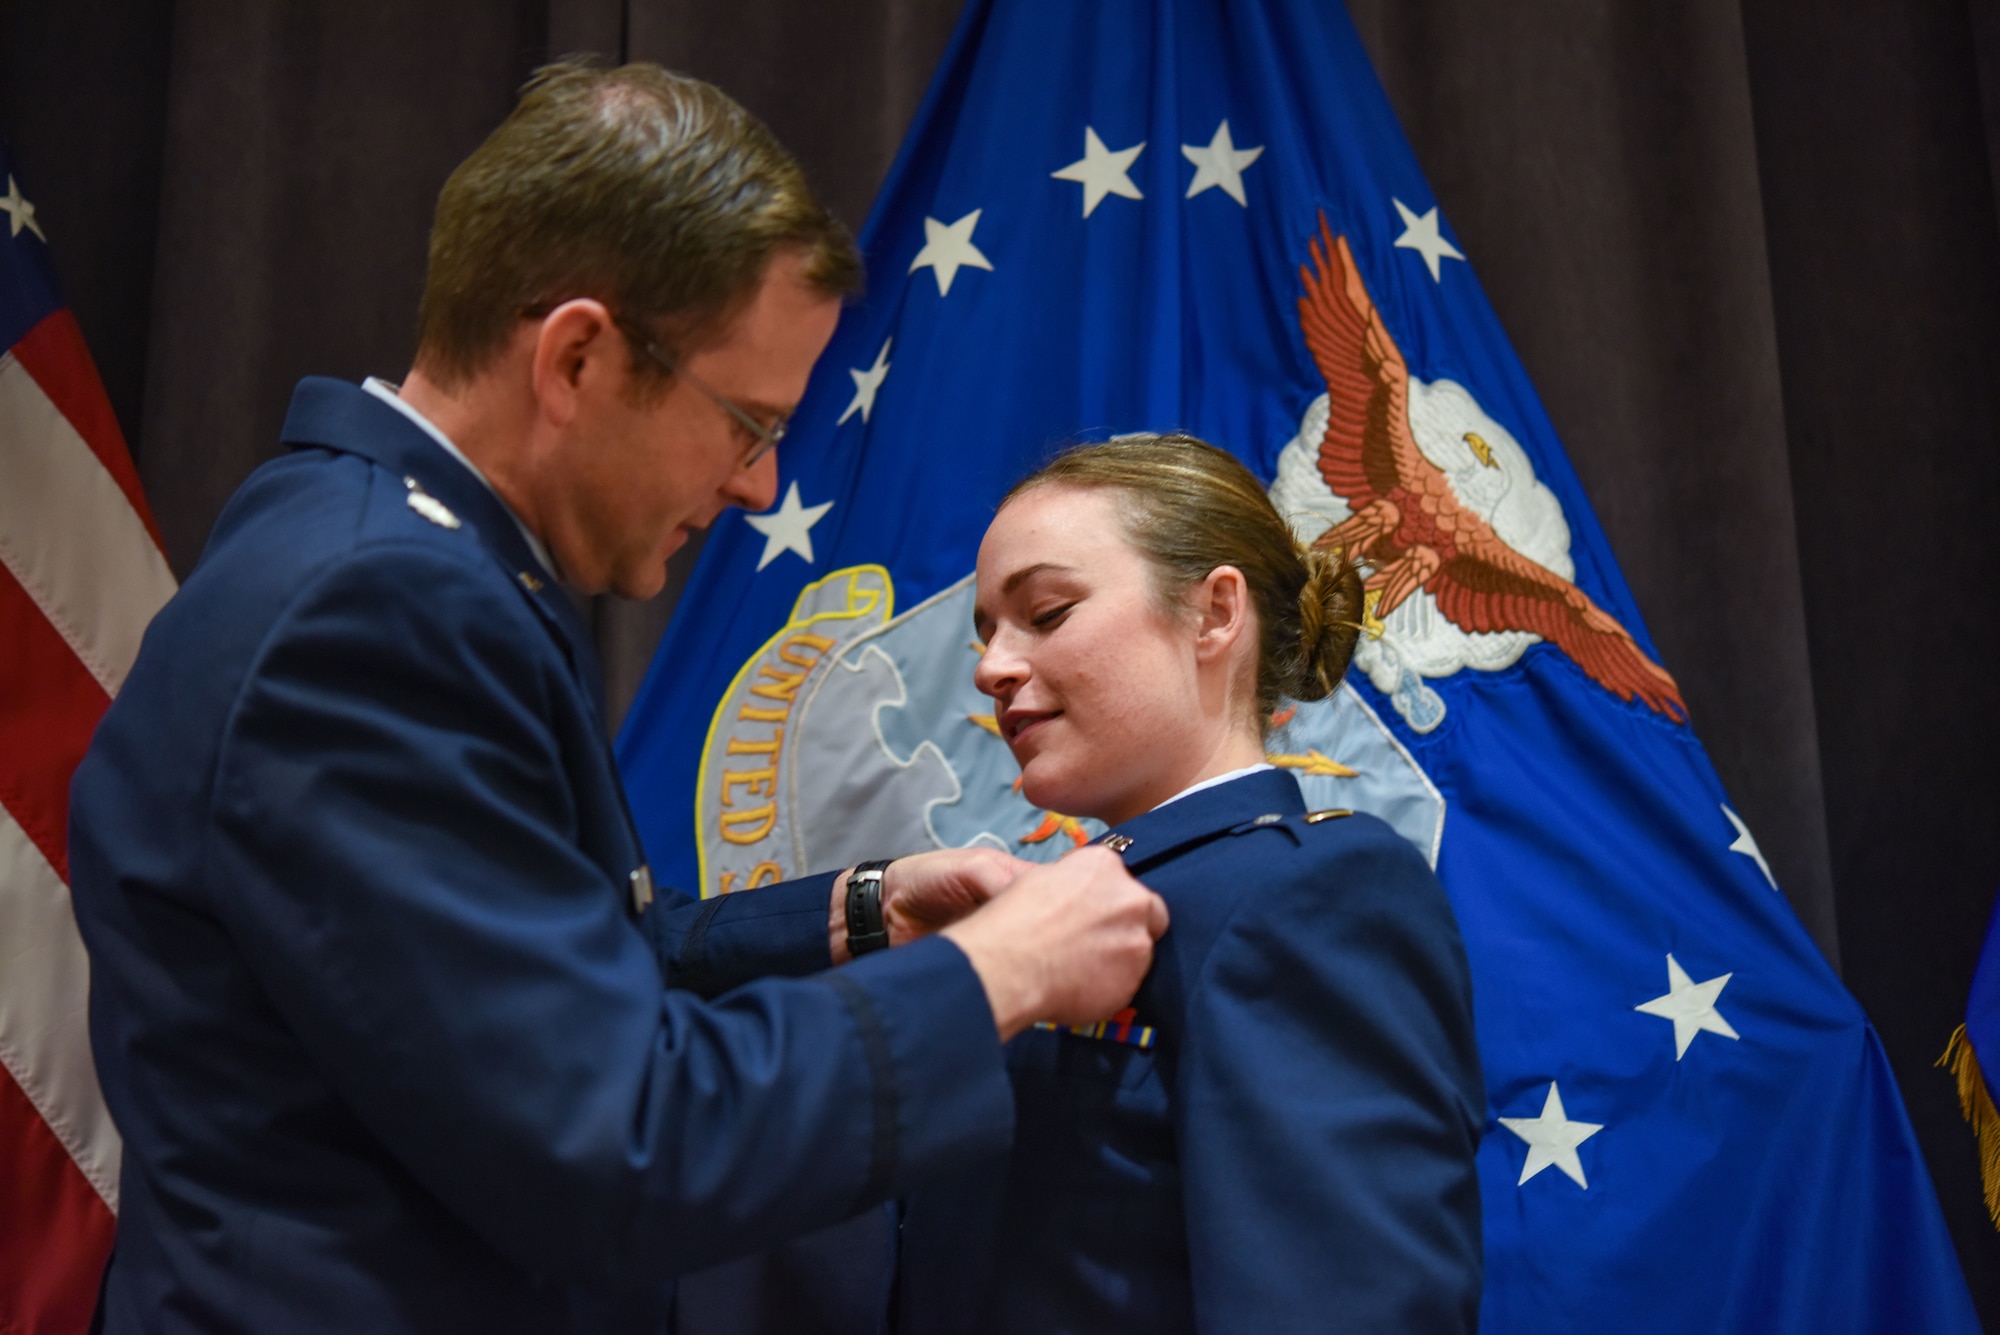 Second Lt. Kristen Savage receives her pilot’s wings during a dual commissioning and “winging” ceremony Dec. 19, 2019, at Maxwell Air Force Base, Alabama. Savage was a student pilot who graduated PTN version 2, an Air Education and Training Command program to explore what is possible in training with the use of innovative technology and how it can be applied to not only pilot training but also to training across AETC.  She earned her wings, but couldn’t wear them until she commissioned. (U.S. Air Force photo by Staff Sgt. Quay Drawdy)